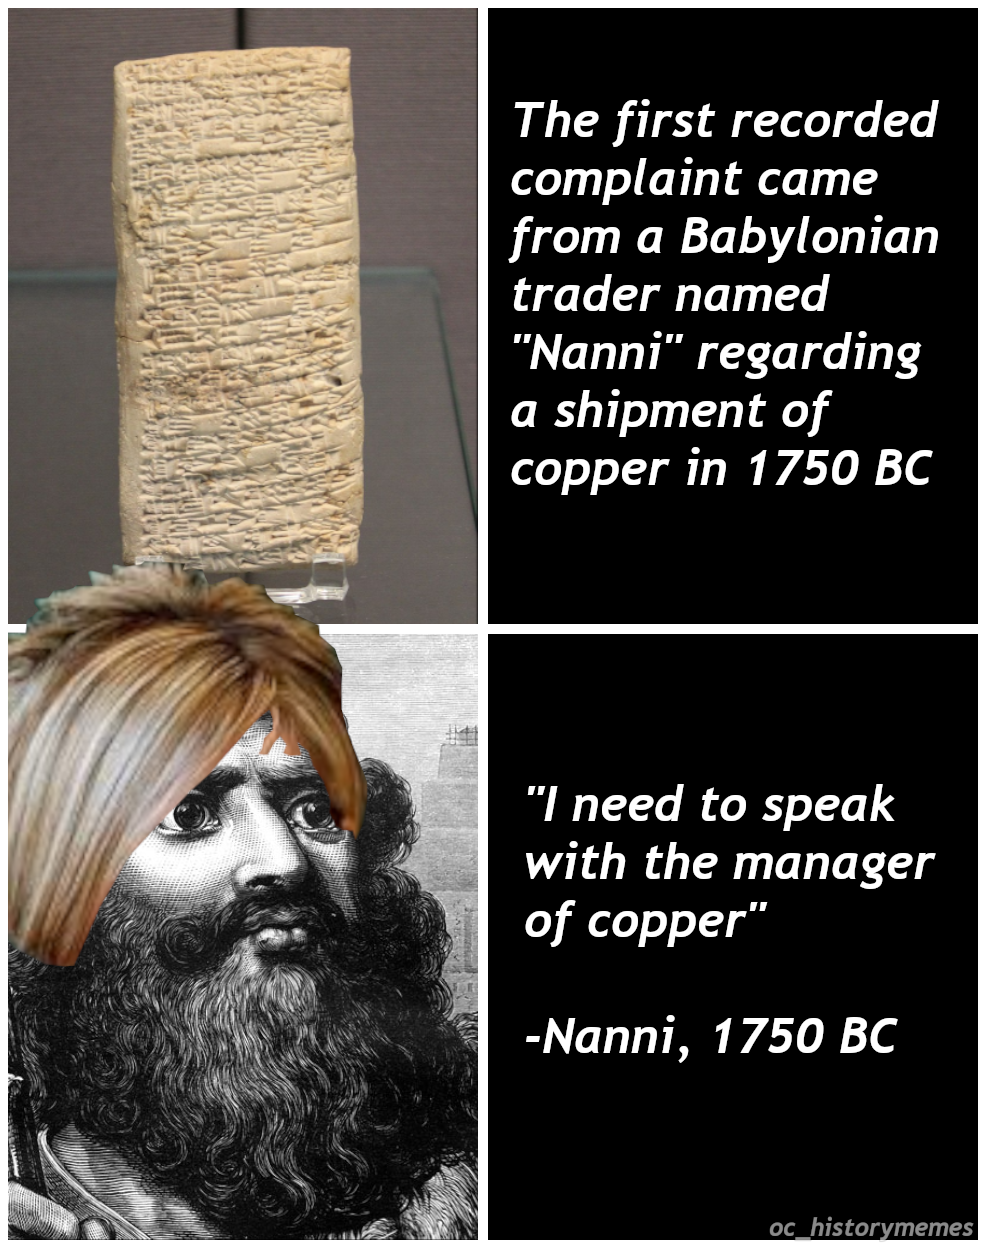 saint peter's basilica, pietà - The first recorded complaint came from a Babylonian trader named "Nanni" regarding a shipment of copper in 1750 Bc "I need to speak with the manager of copper" Nanni, 1750 Bc oc historymemes